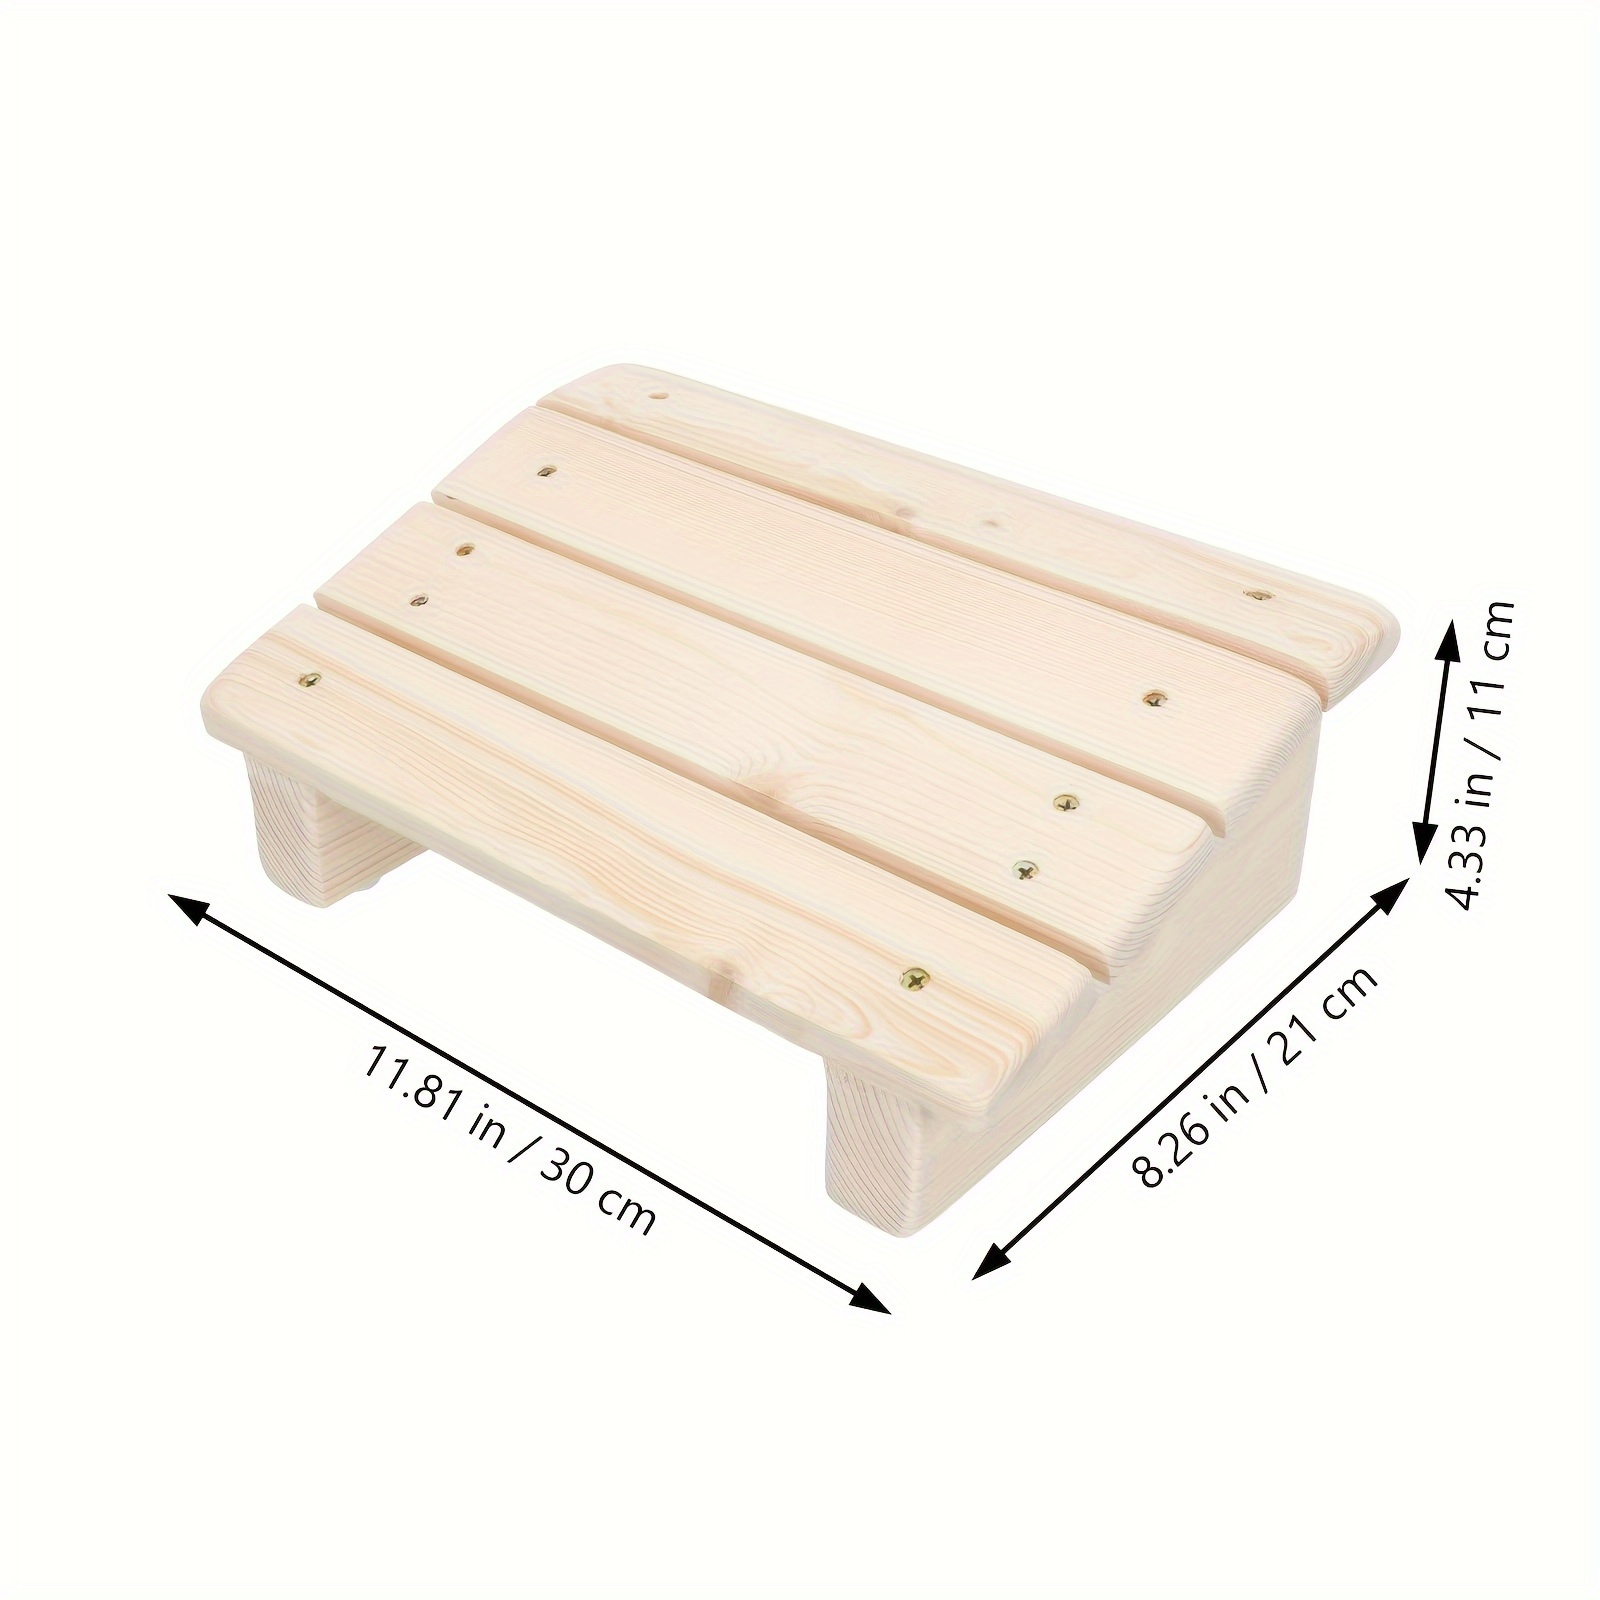 Ergonomic Solid Wood Footrest Under Desk /pressure Relief Foot Stool for  Home and Office/wooden Foot Rest Stool/footstool 